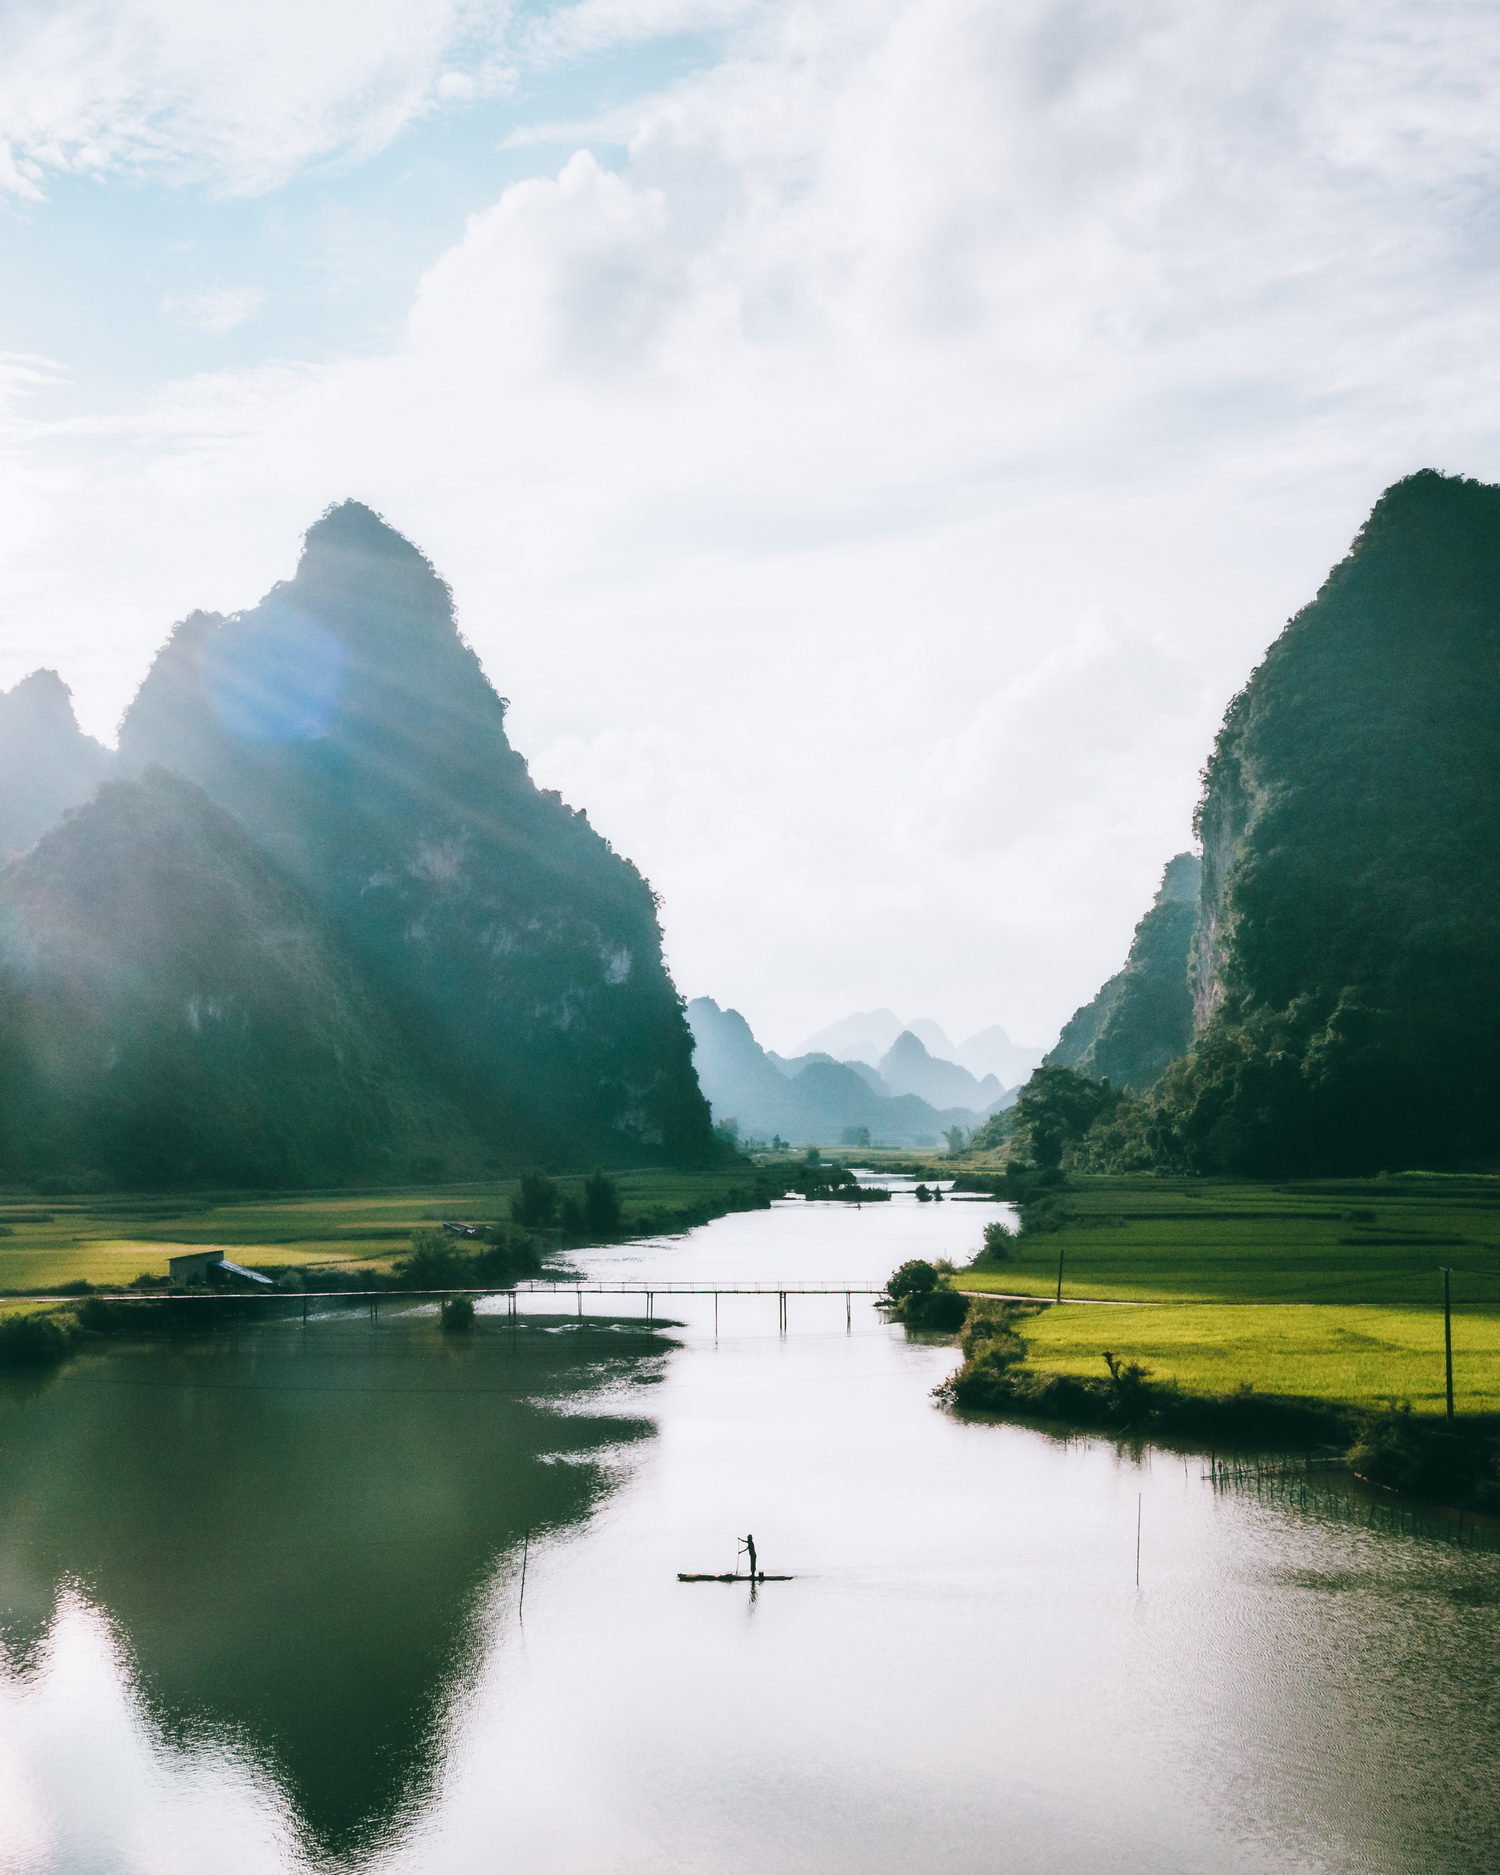 A photo of Trung Khanh District in the northern province of Cao Bang by Benjamin Tortorelli.